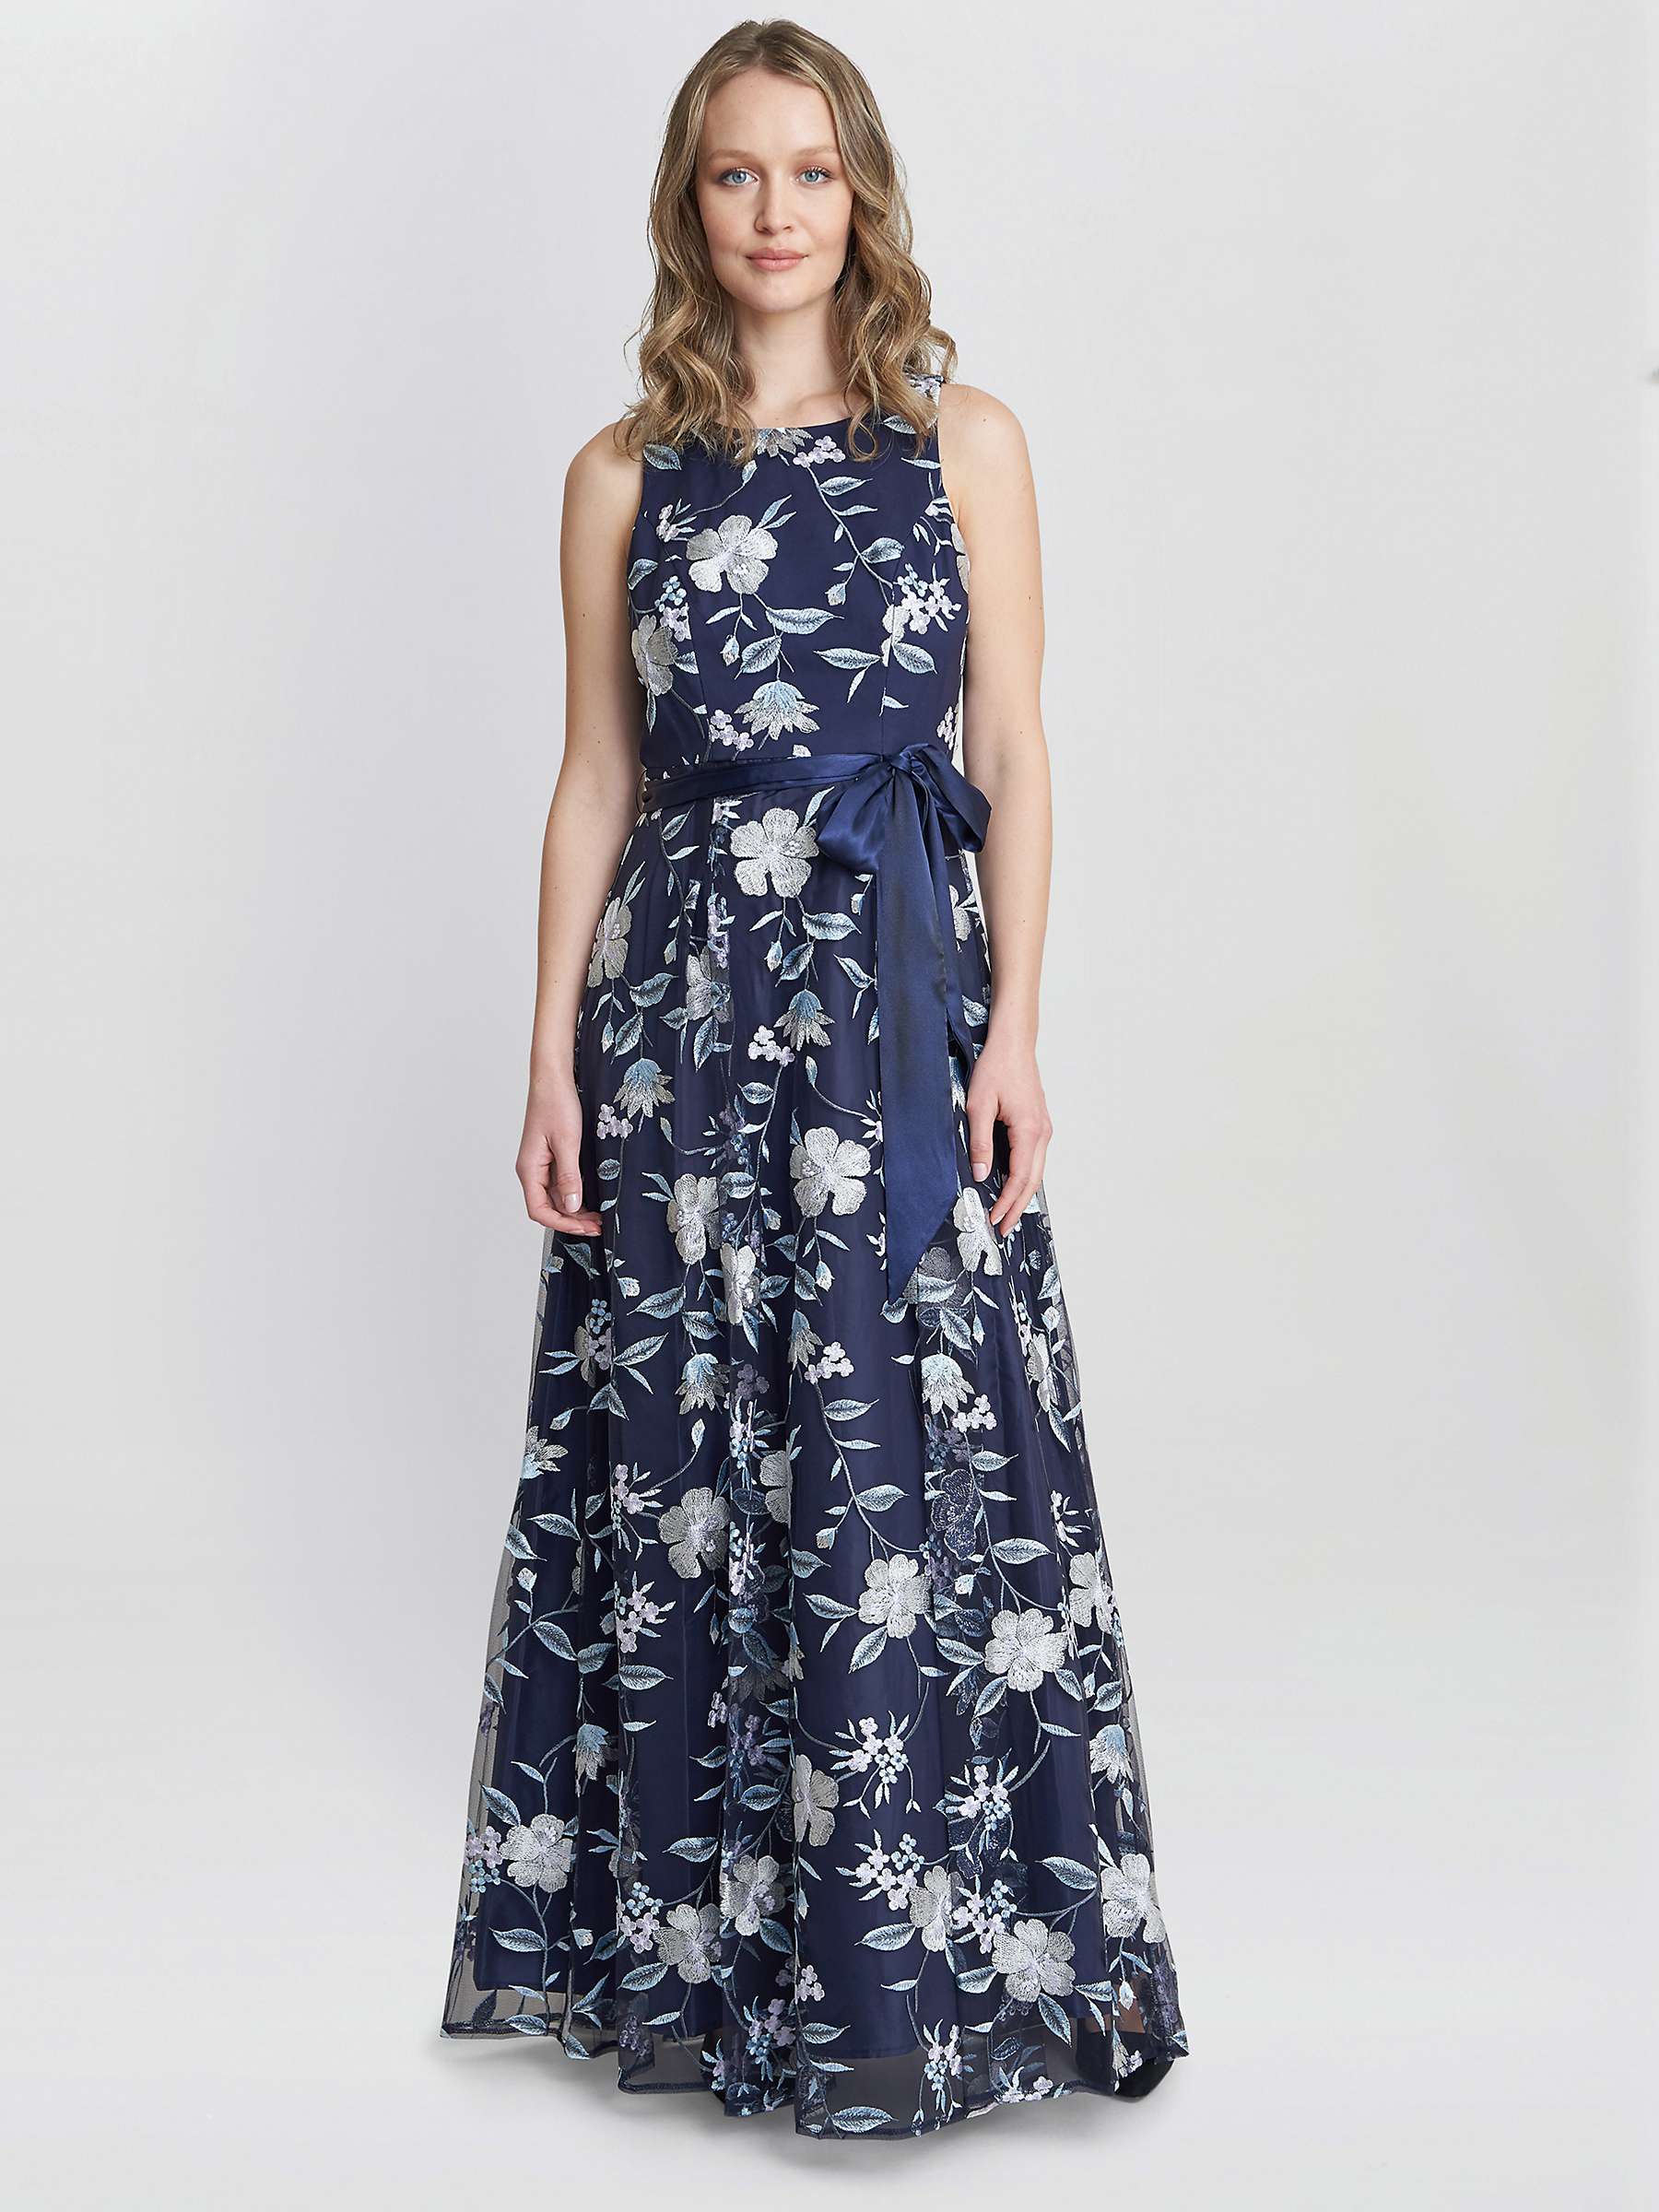 Buy Gina Bacconi Judith Embroidered Sleeveless Maxi Dress, Navy/Multi Online at johnlewis.com